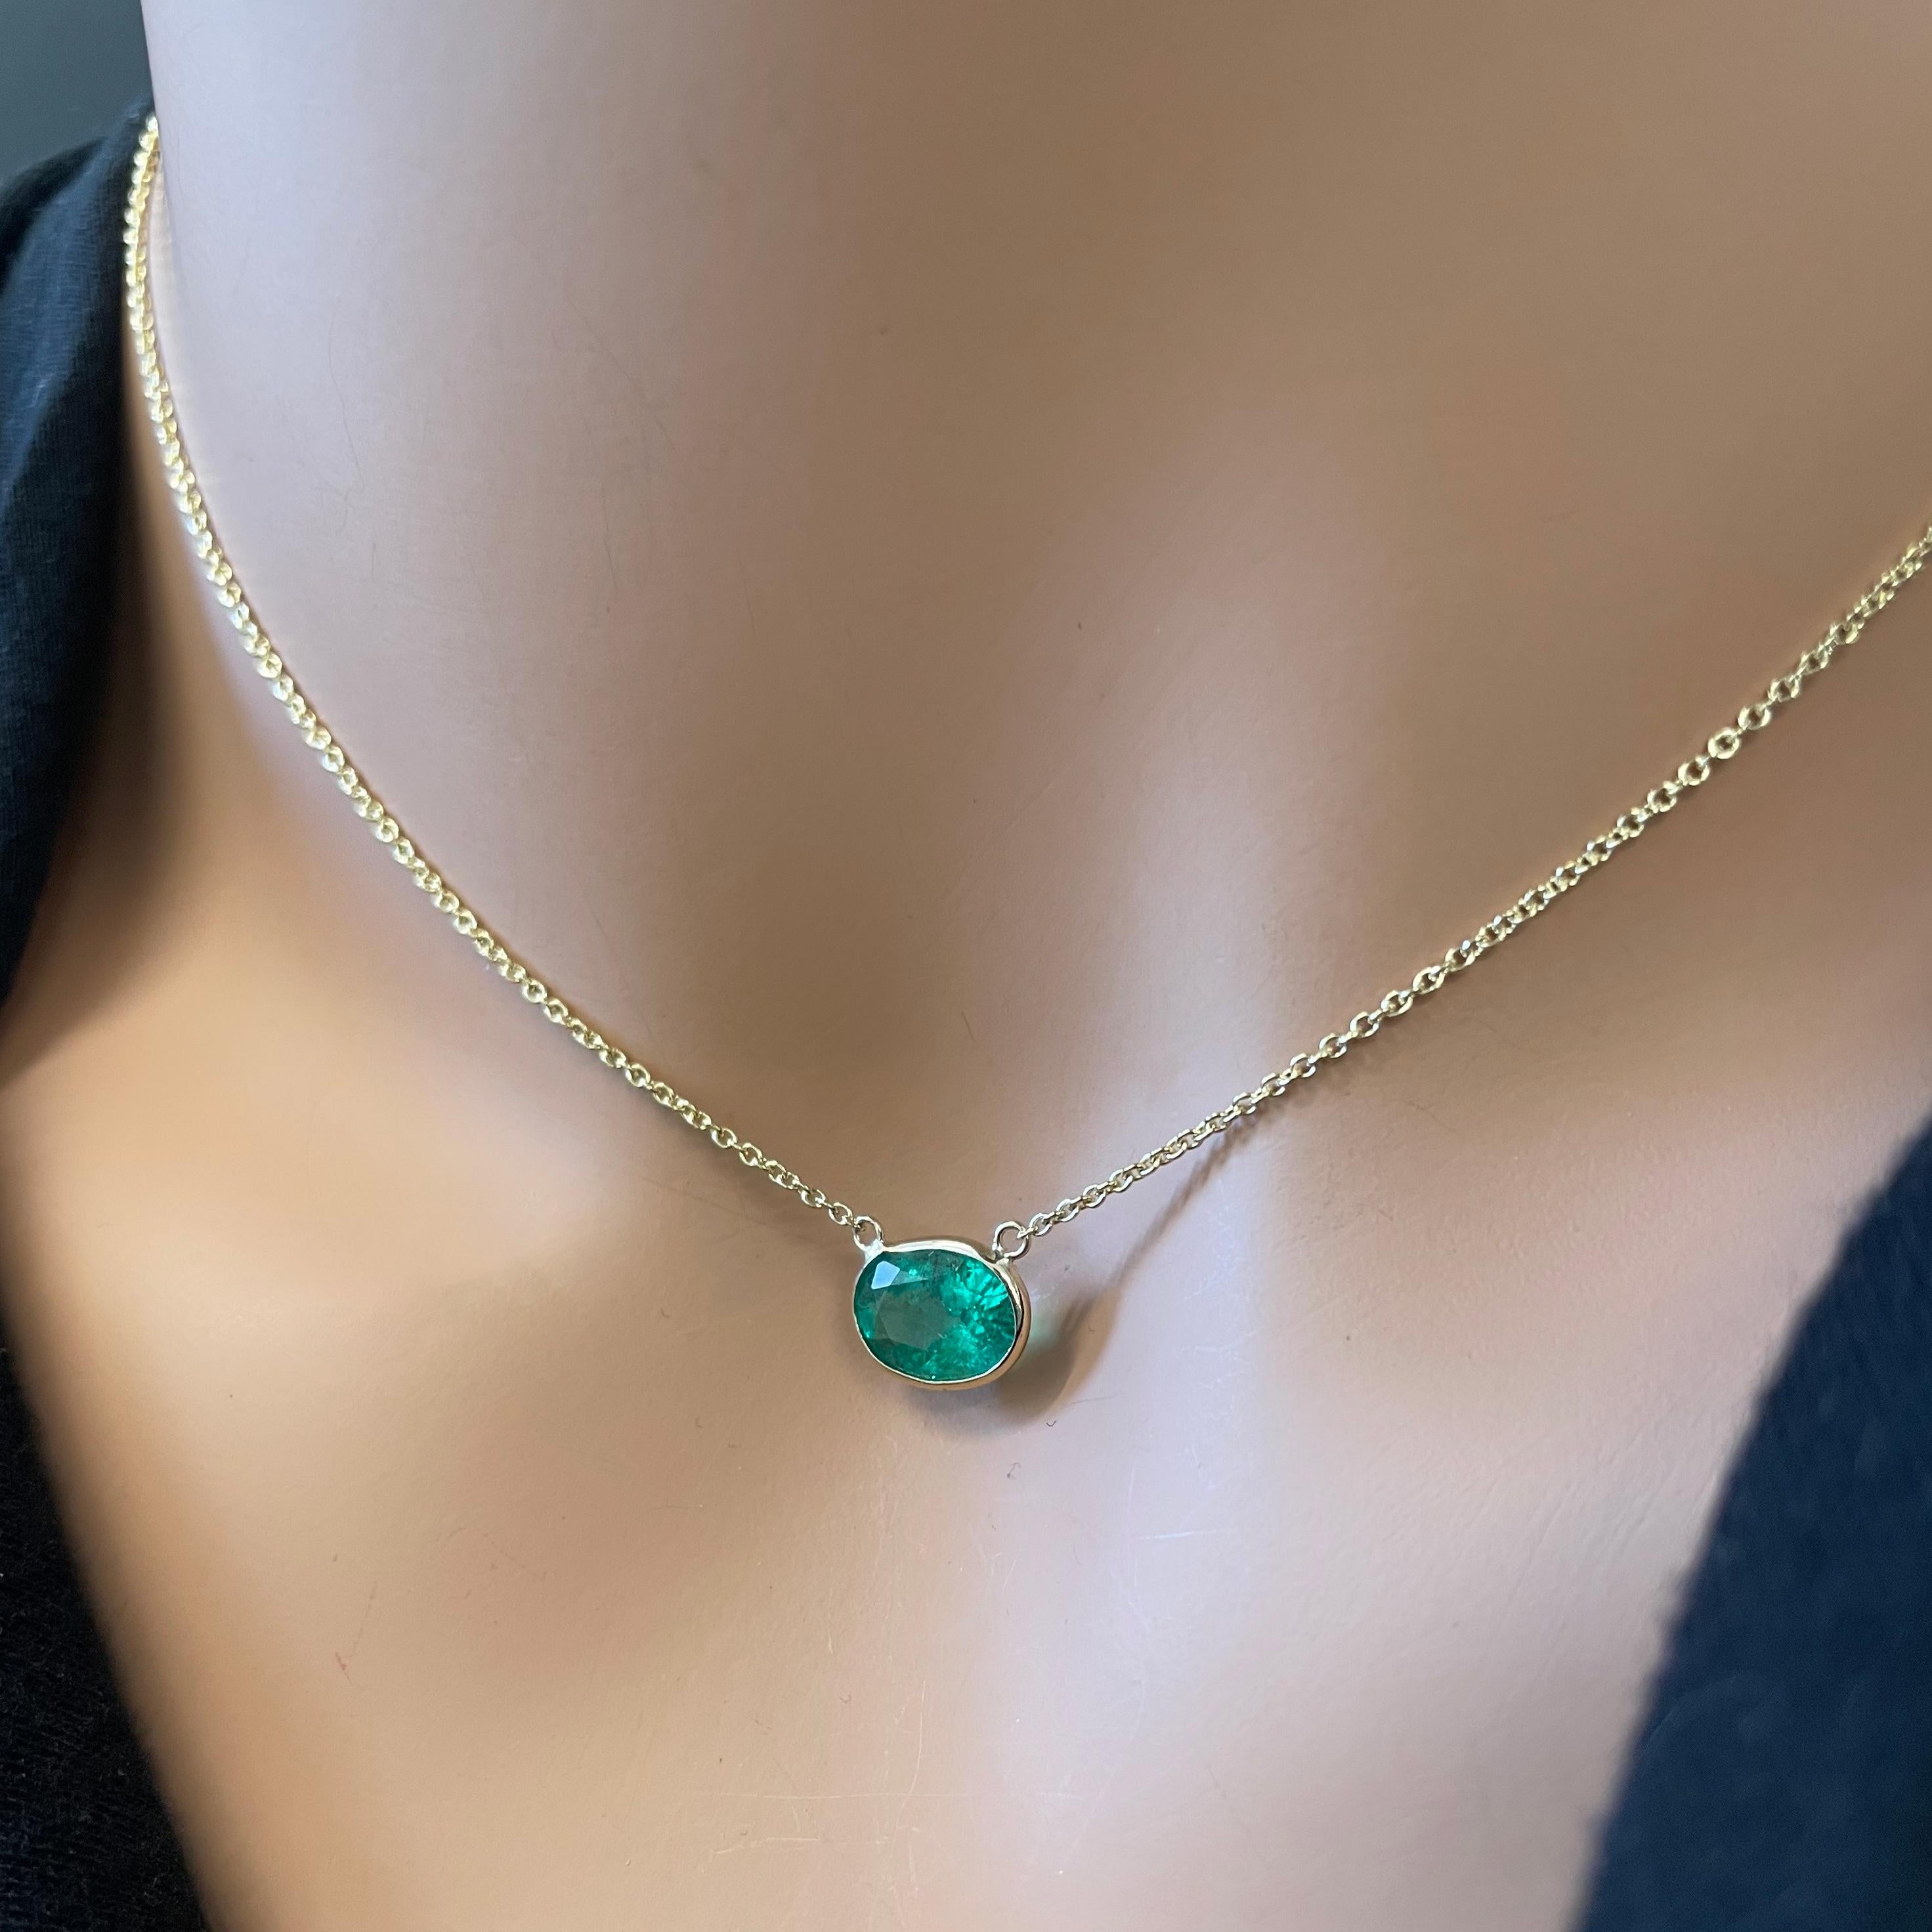 This necklace features an oval-cut green emerald with a weight of 1.96 carats, set in 14k yellow gold (YG). Emeralds are highly prized for their vibrant green color, and the oval cut is a classic and elegant choice for gemstones, offering a timeless